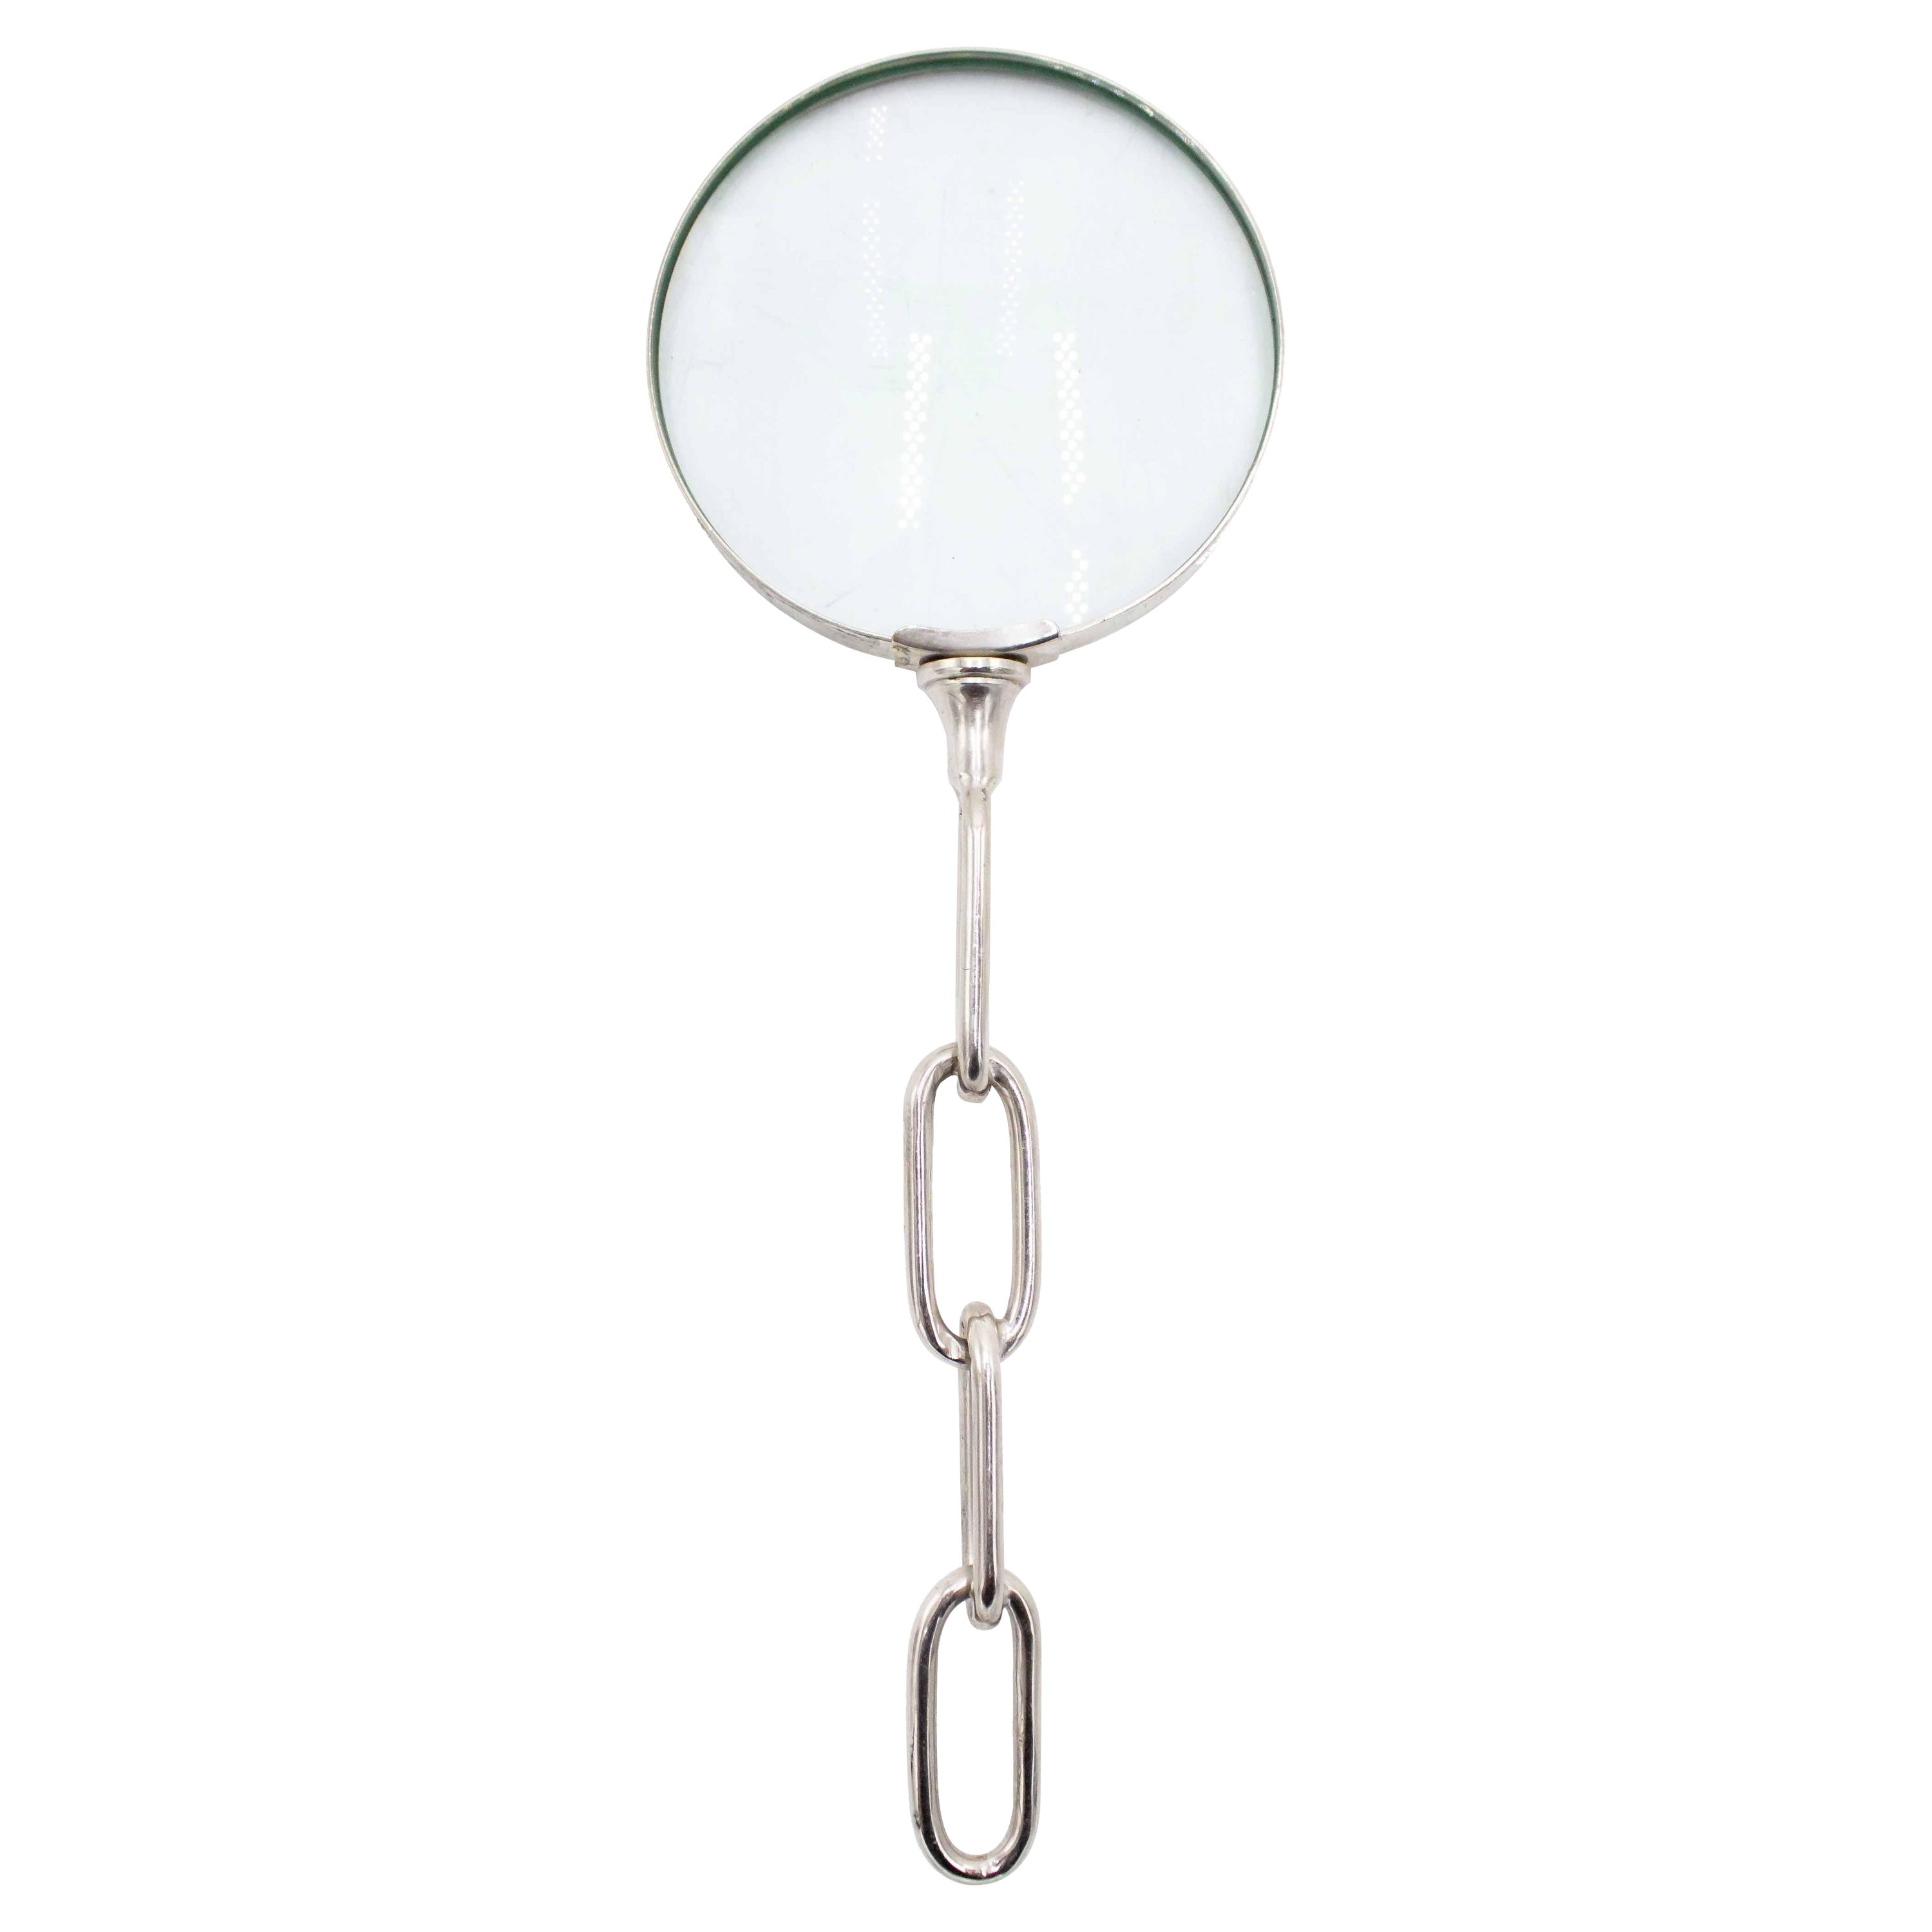 What is the best magnifying glass?